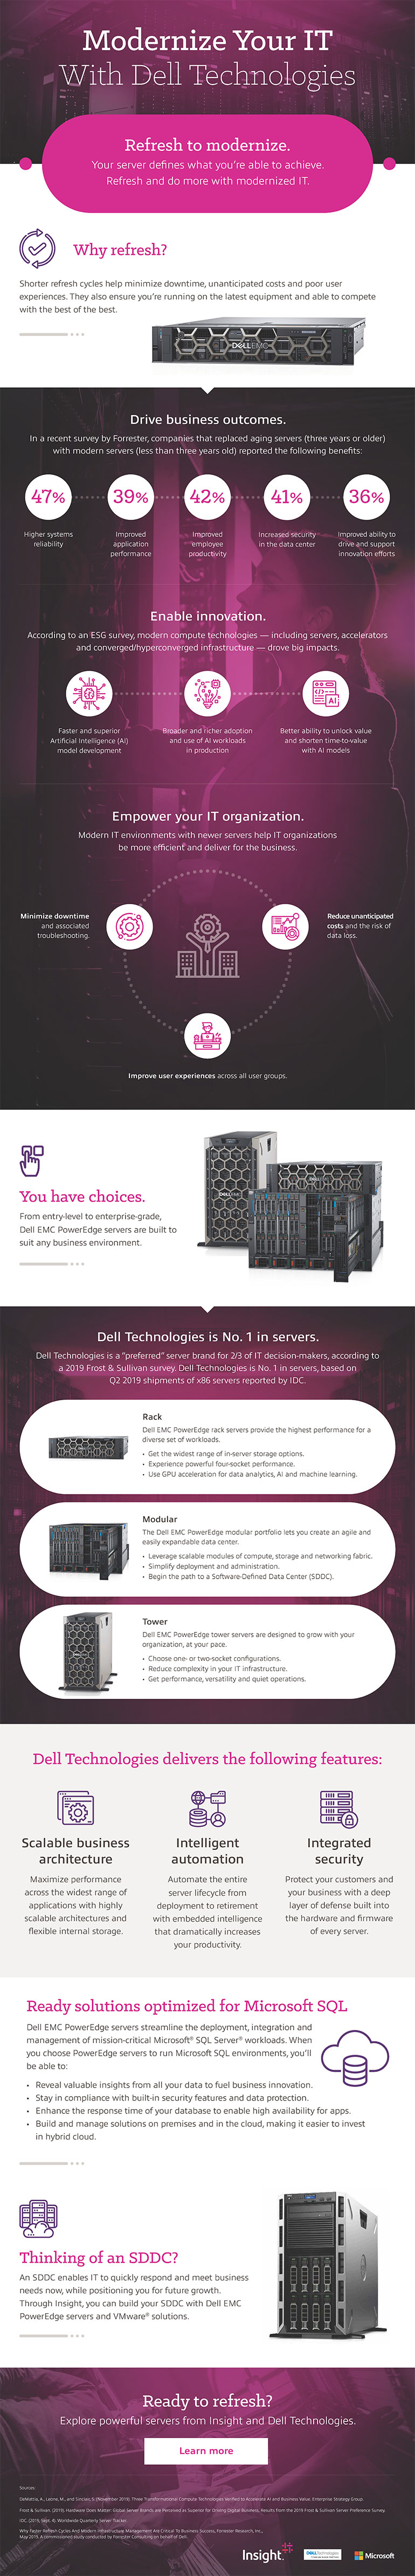 Modernize Your IT With Dell Technologies infographic as transcribed below